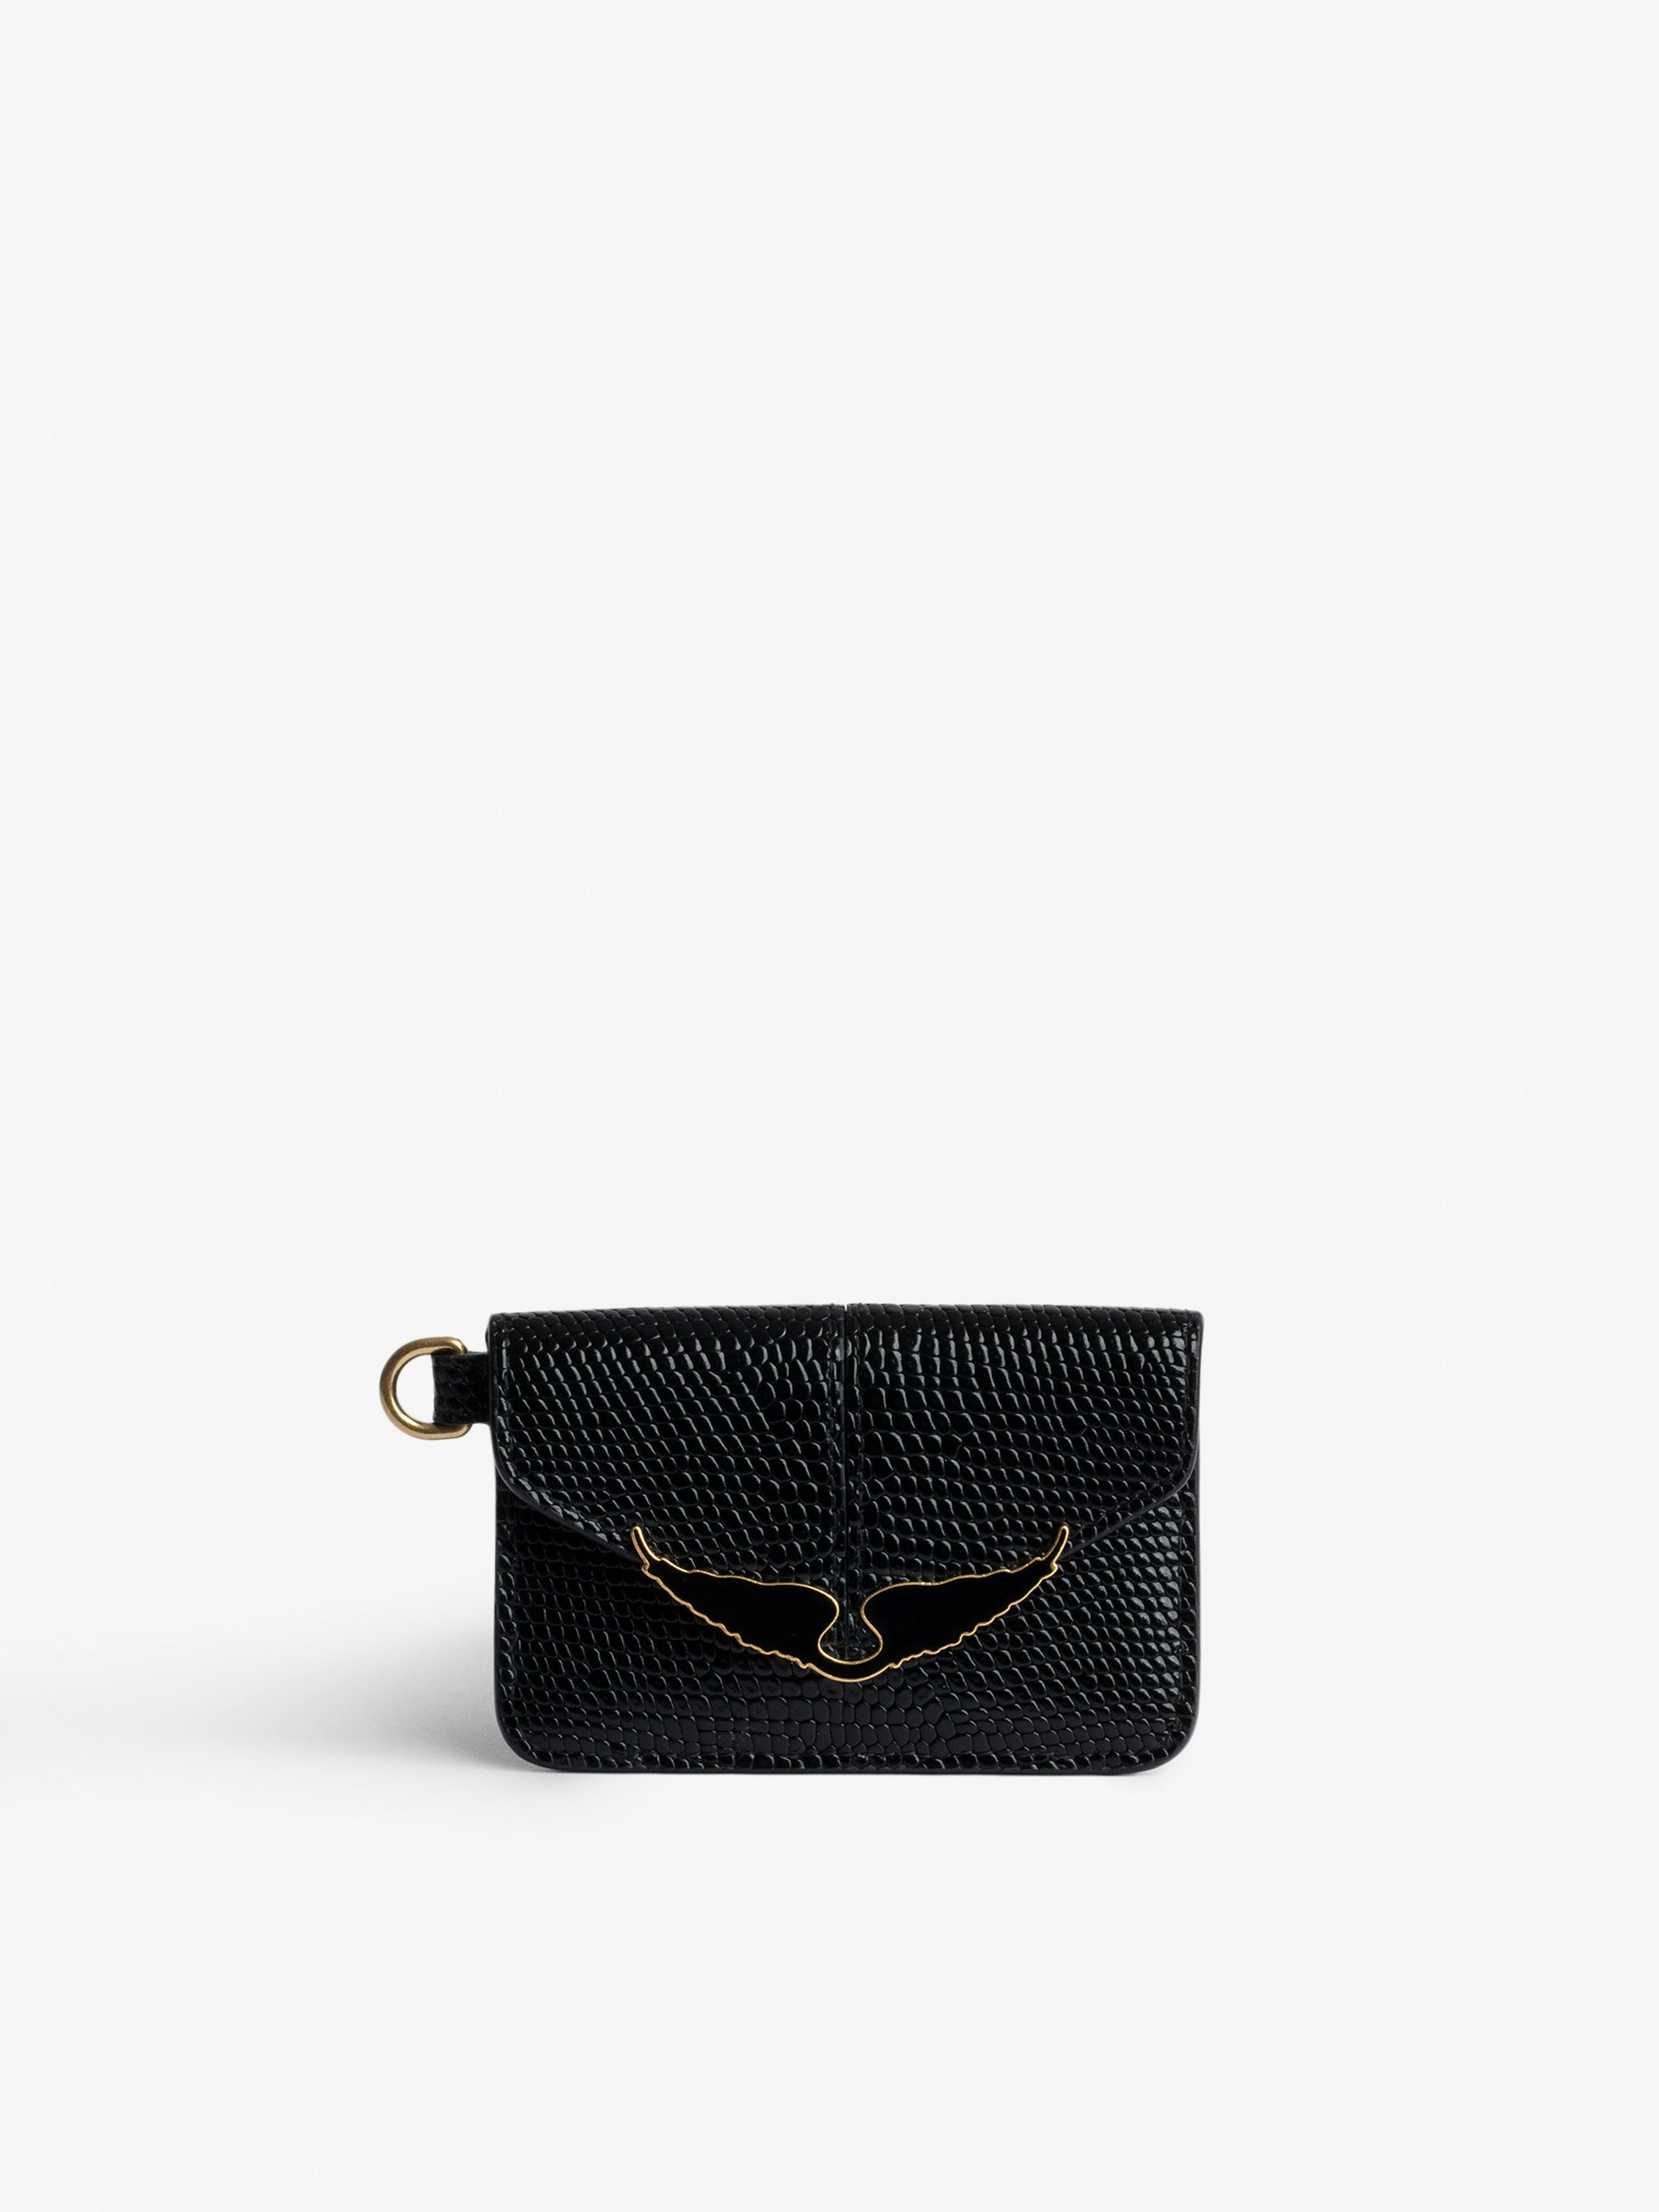 Borderline Pass Card Case - Women’s card case in shiny black leather with embossed iguana and black lacquered wings on the clasp.